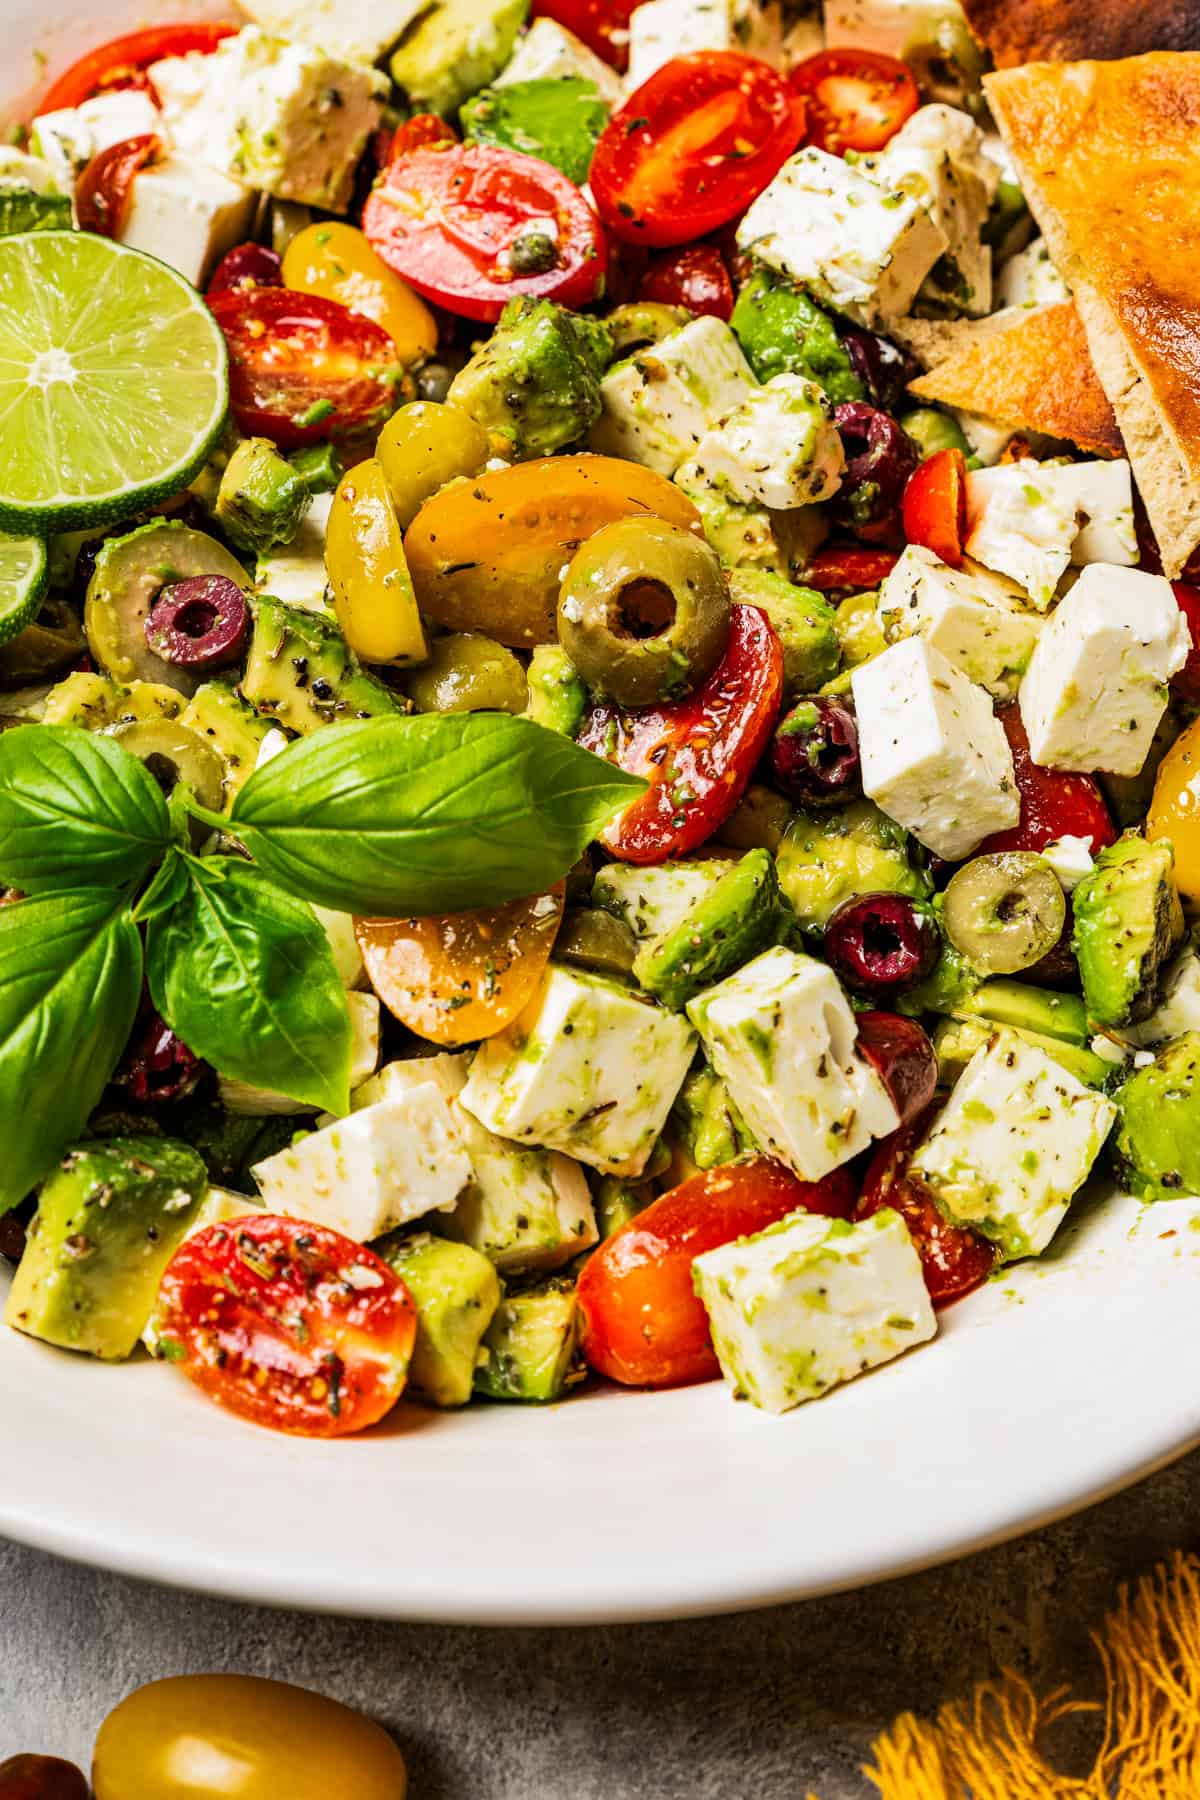 Avocado salad with olives, tomatoes, and feta in a large salad bowl garnished with fresh basil and lime slices.